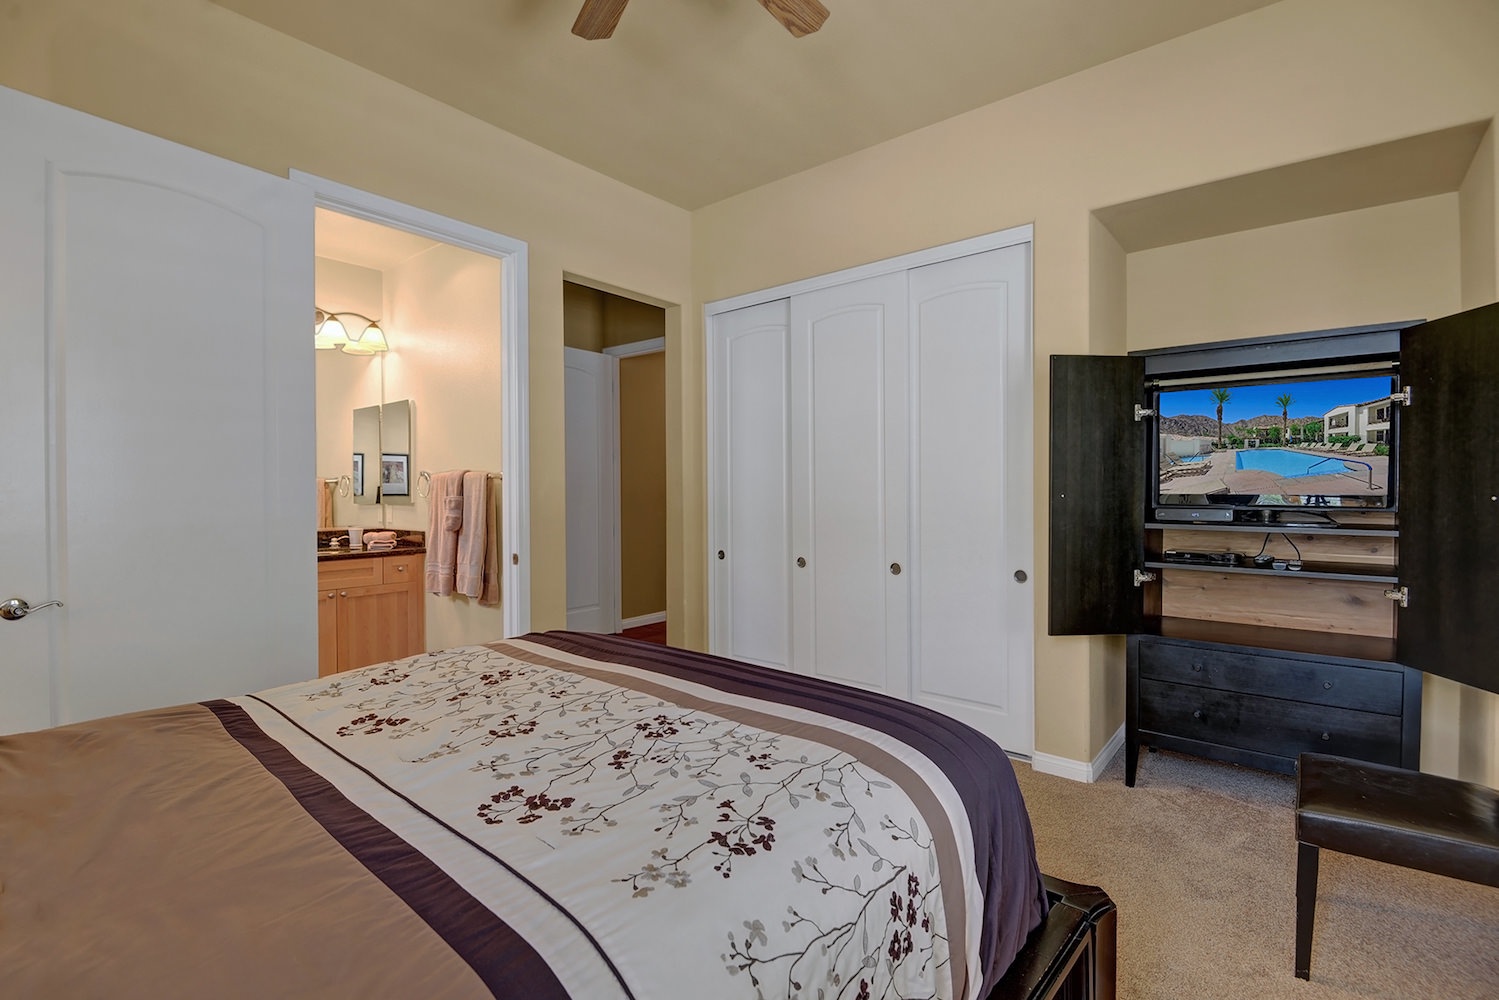 Guest bedroom with TV